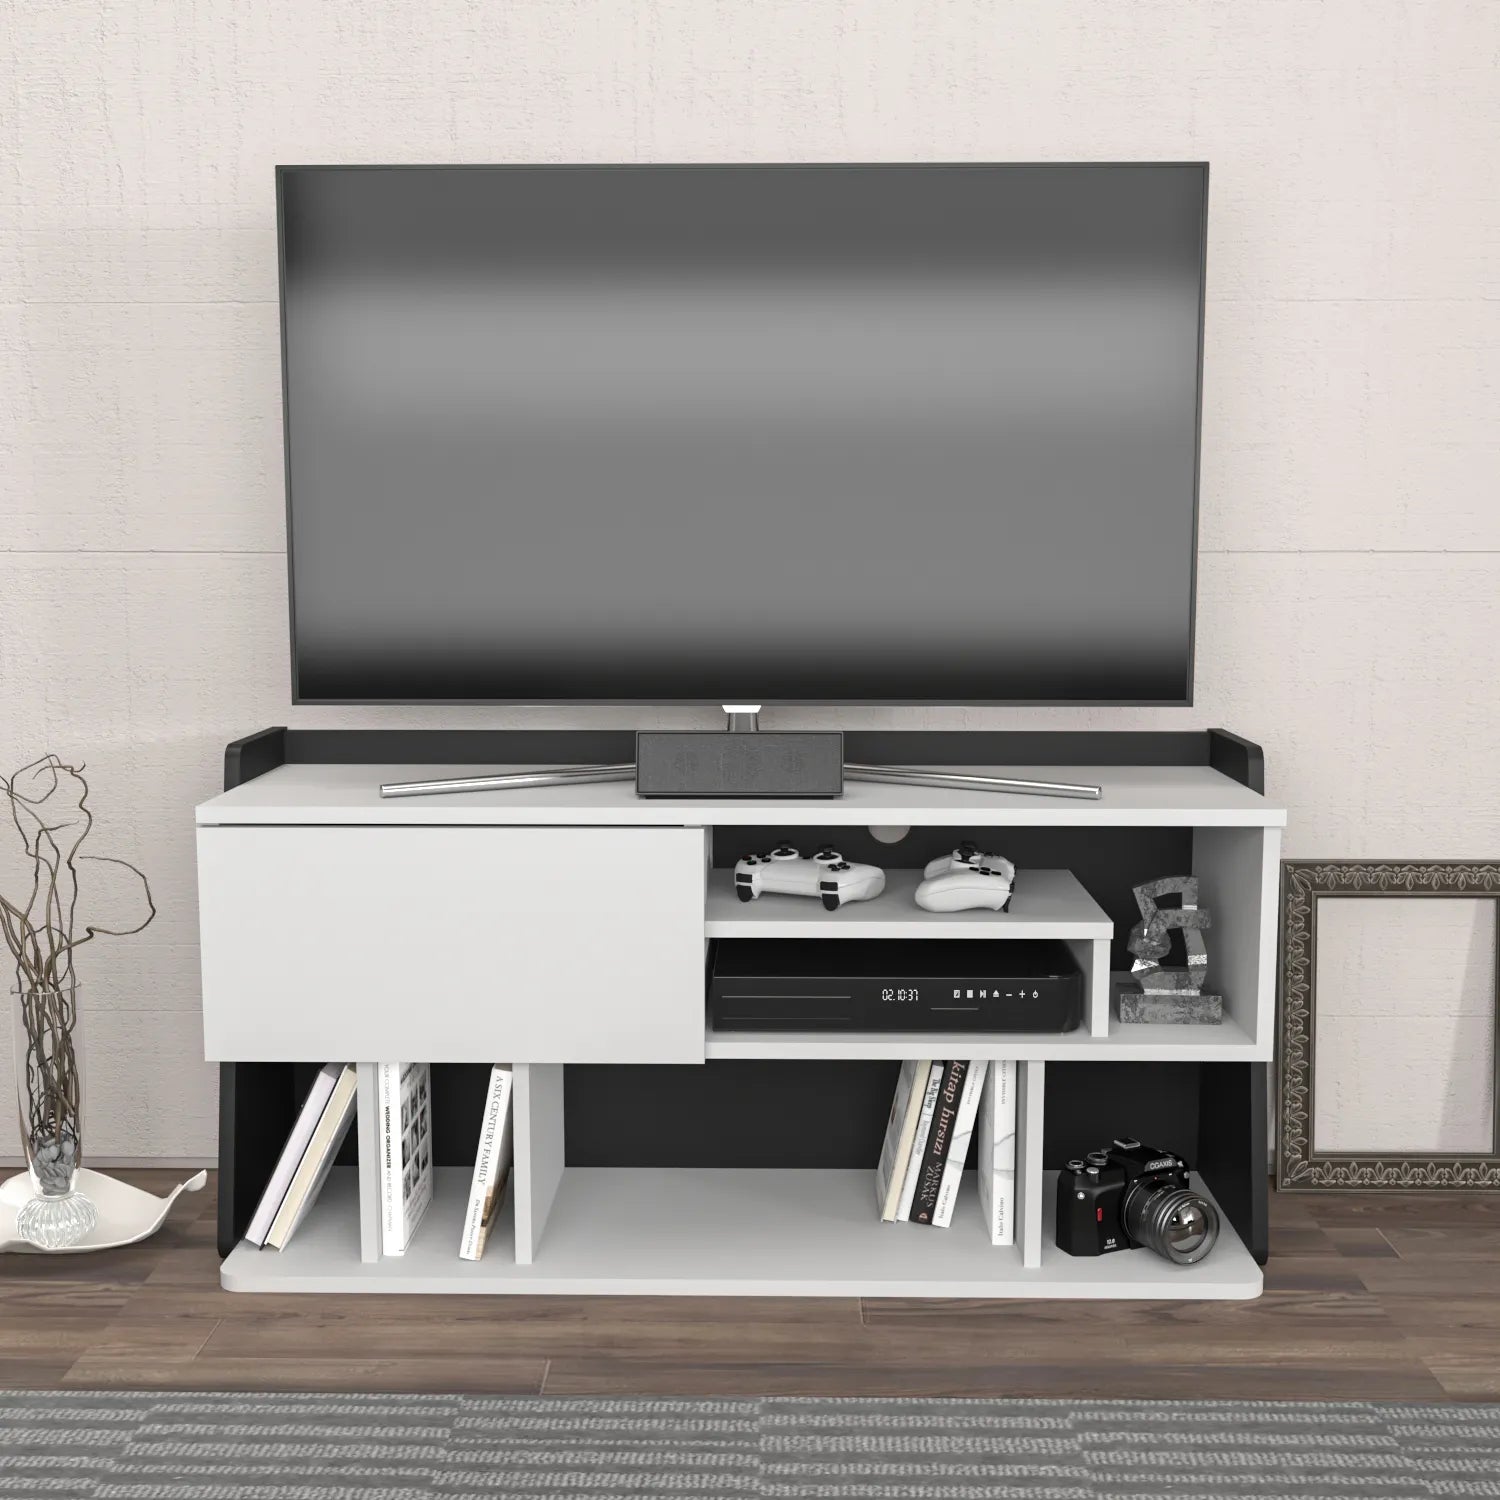 Raca 47" Wide TV Stand and Media Console for TVs up to 55"